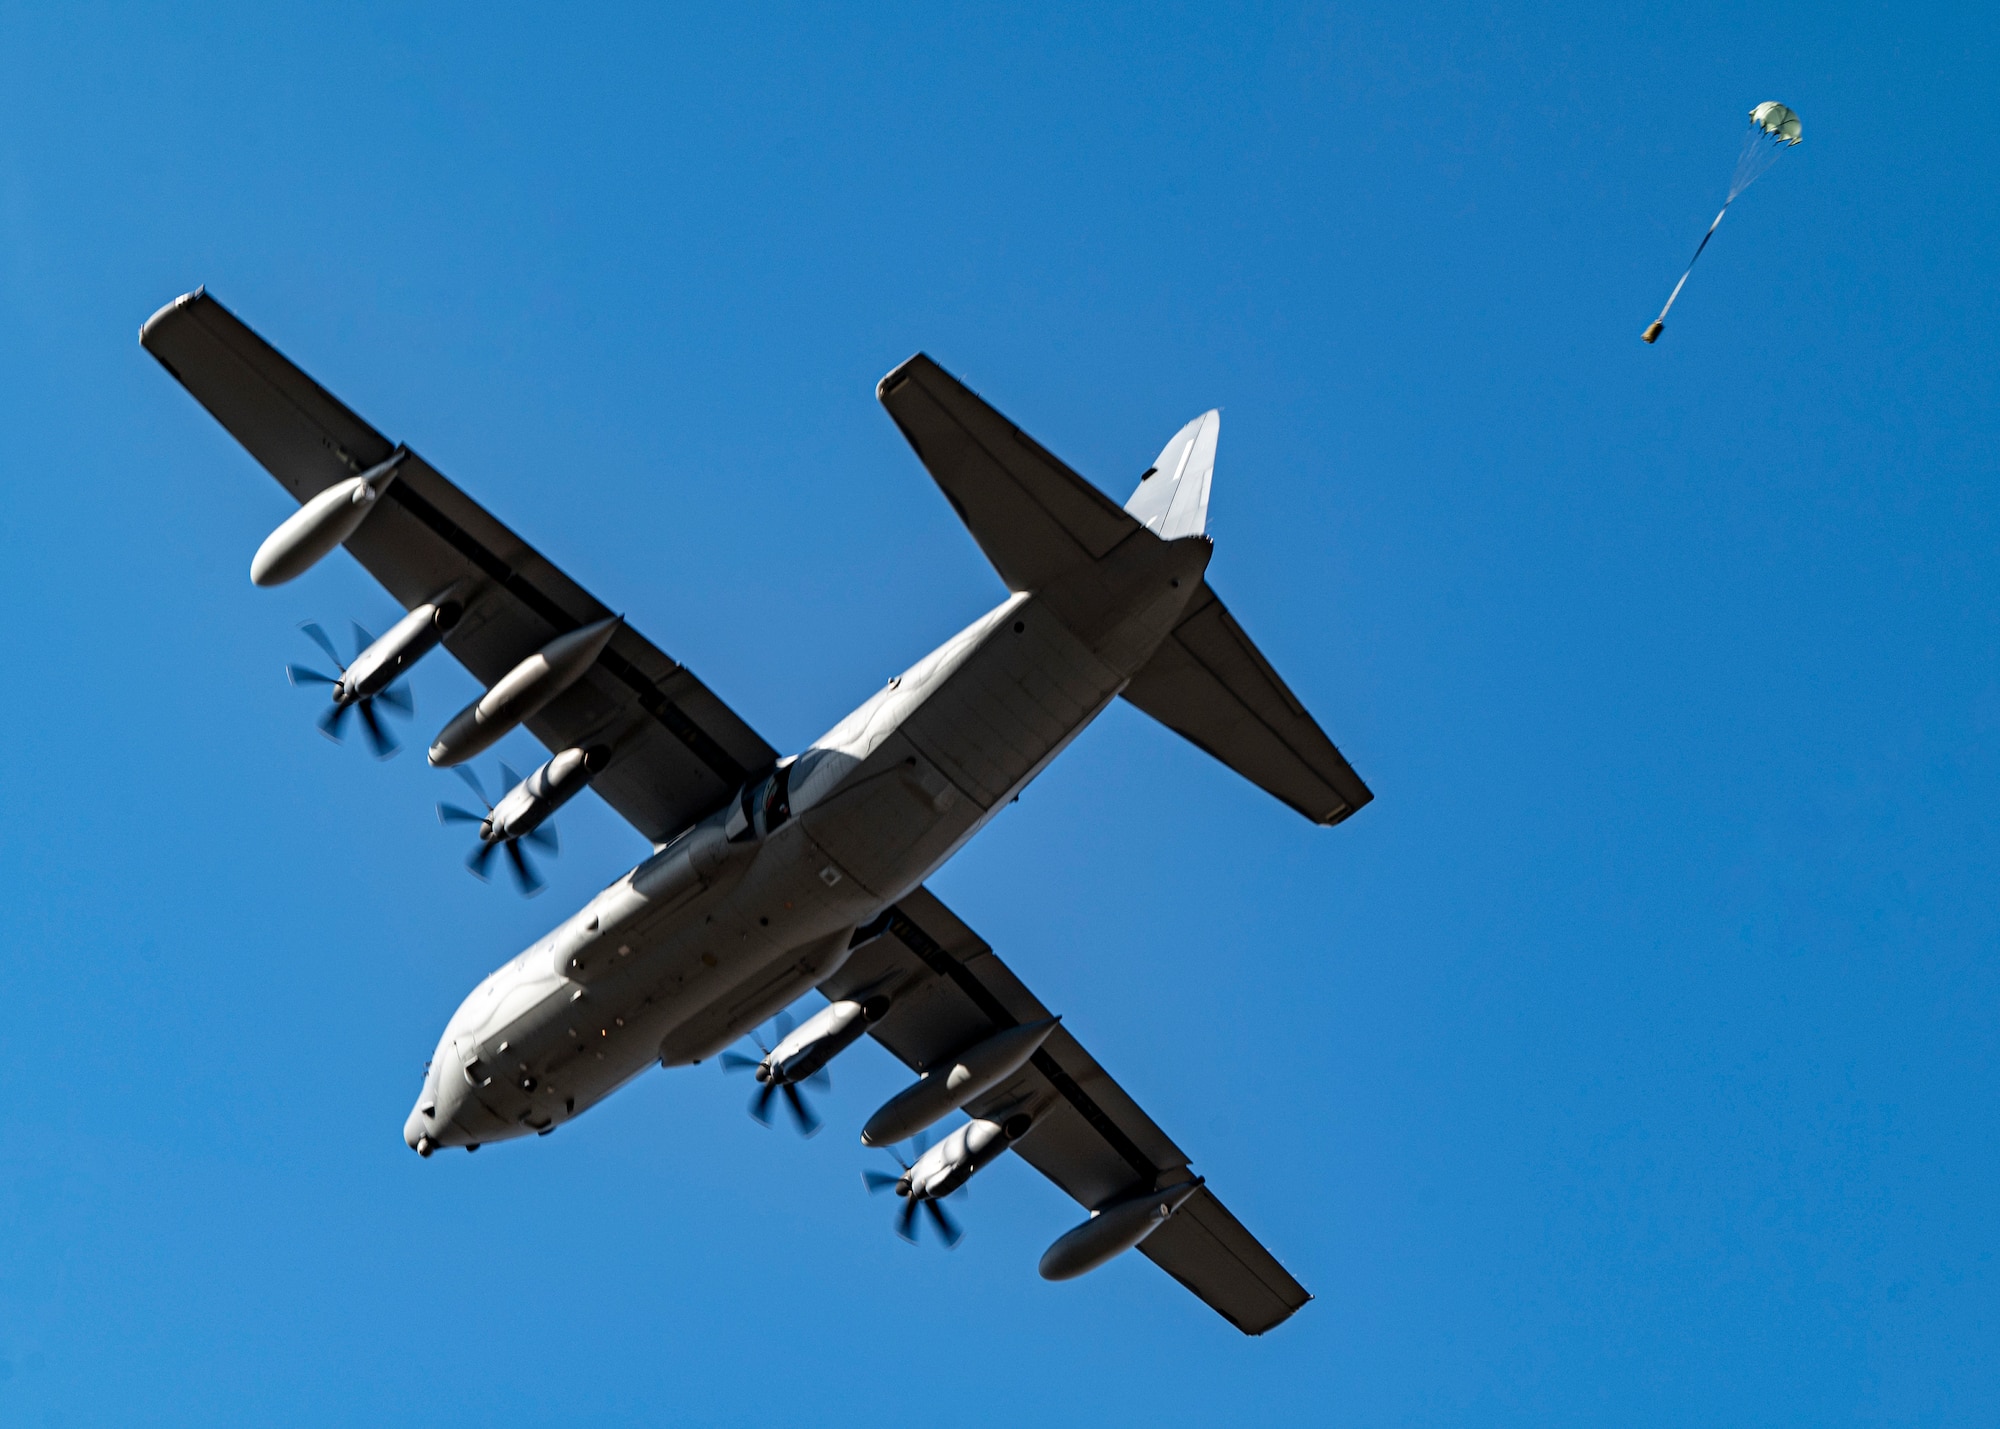 U.S. Air Force rescue Airmen drop cargo from an HC-130J Combat King II over Smoky Hill Air National Guard Range, Kansas, March 26, 2024. The cargo drops were part of the Rescue Rodeo, a rescue training event and competition. Each squadron participating in the event performed multiple precision drops over the range. (U.S. Air Force photo by Airman 1st Class Leonid Soubbotine)